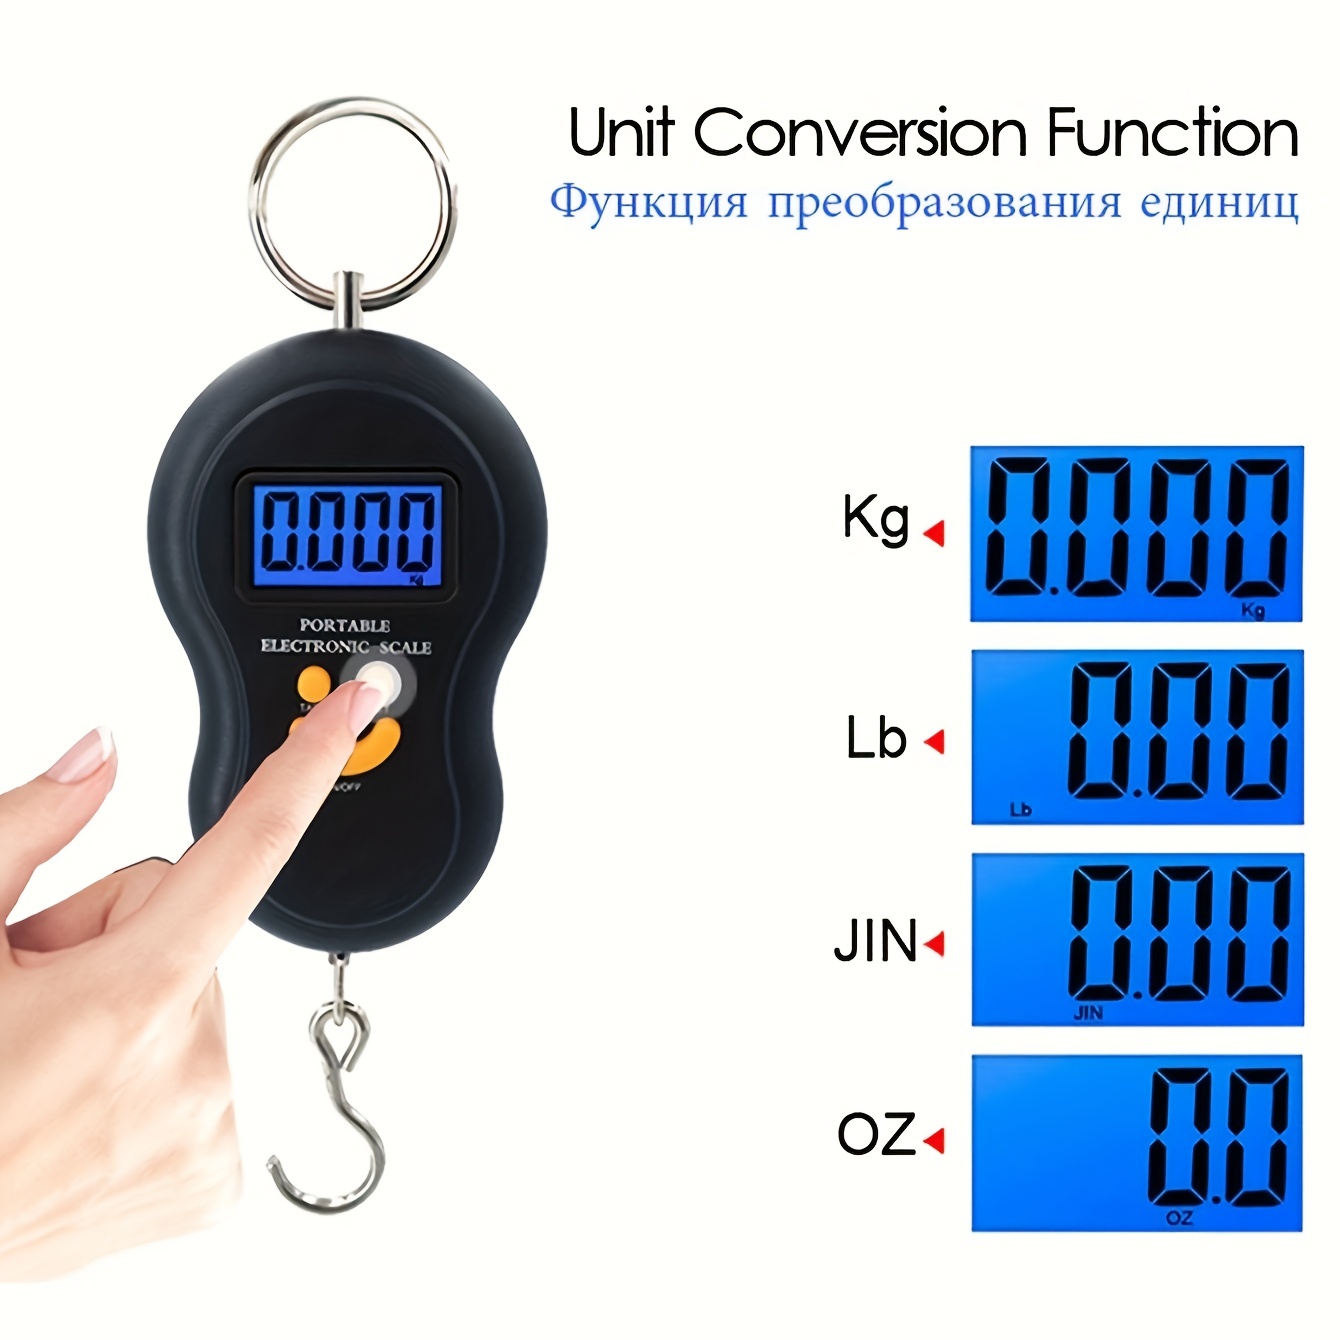 Portable Digital Hanging Weight Scale - Black